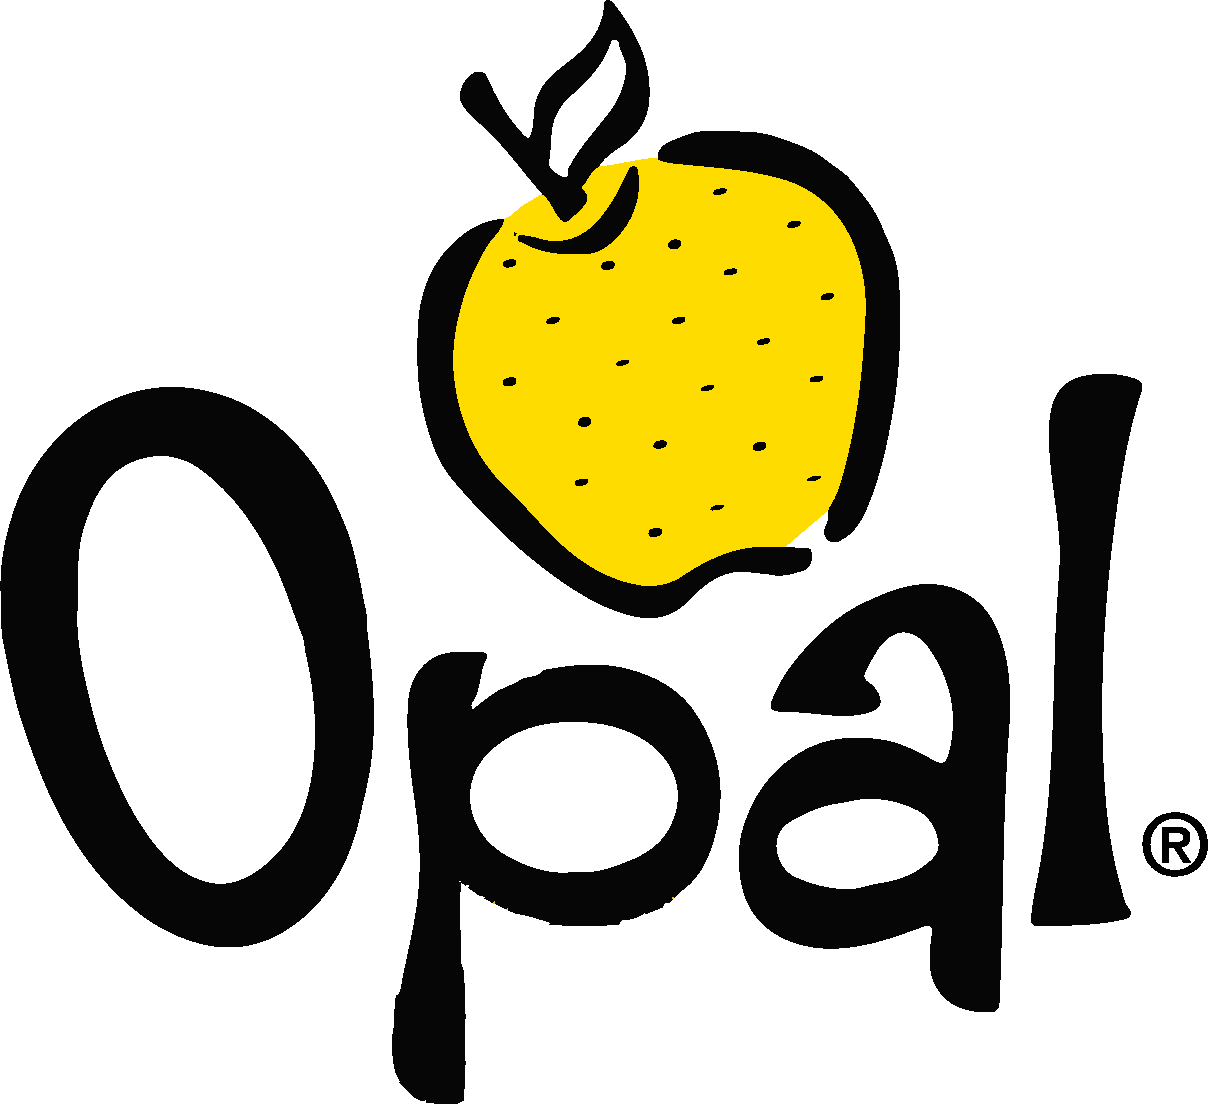 Have You Ever Tried an Opal Apple?